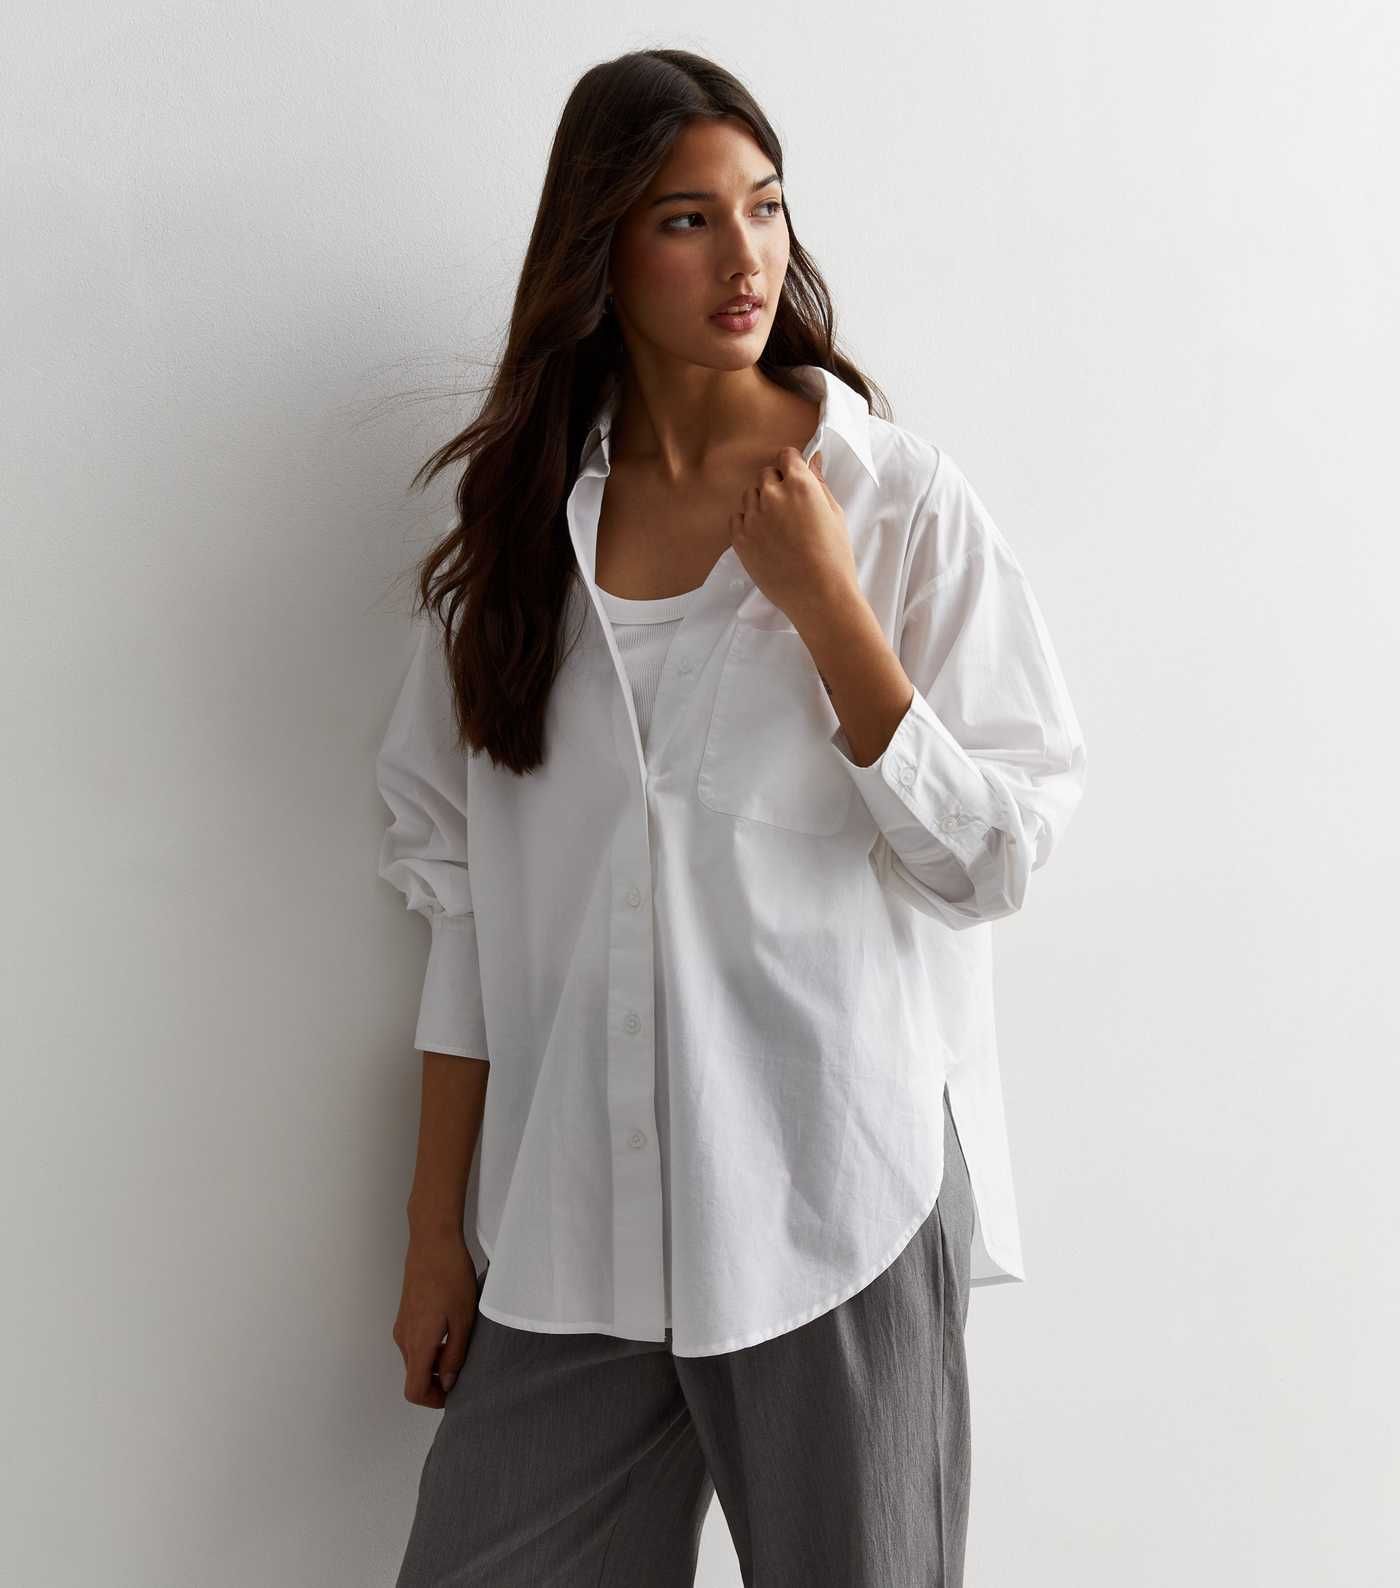 White Poplin Cotton Shirt
						
						Add to Saved Items
						Remove from Saved Items | New Look (UK)